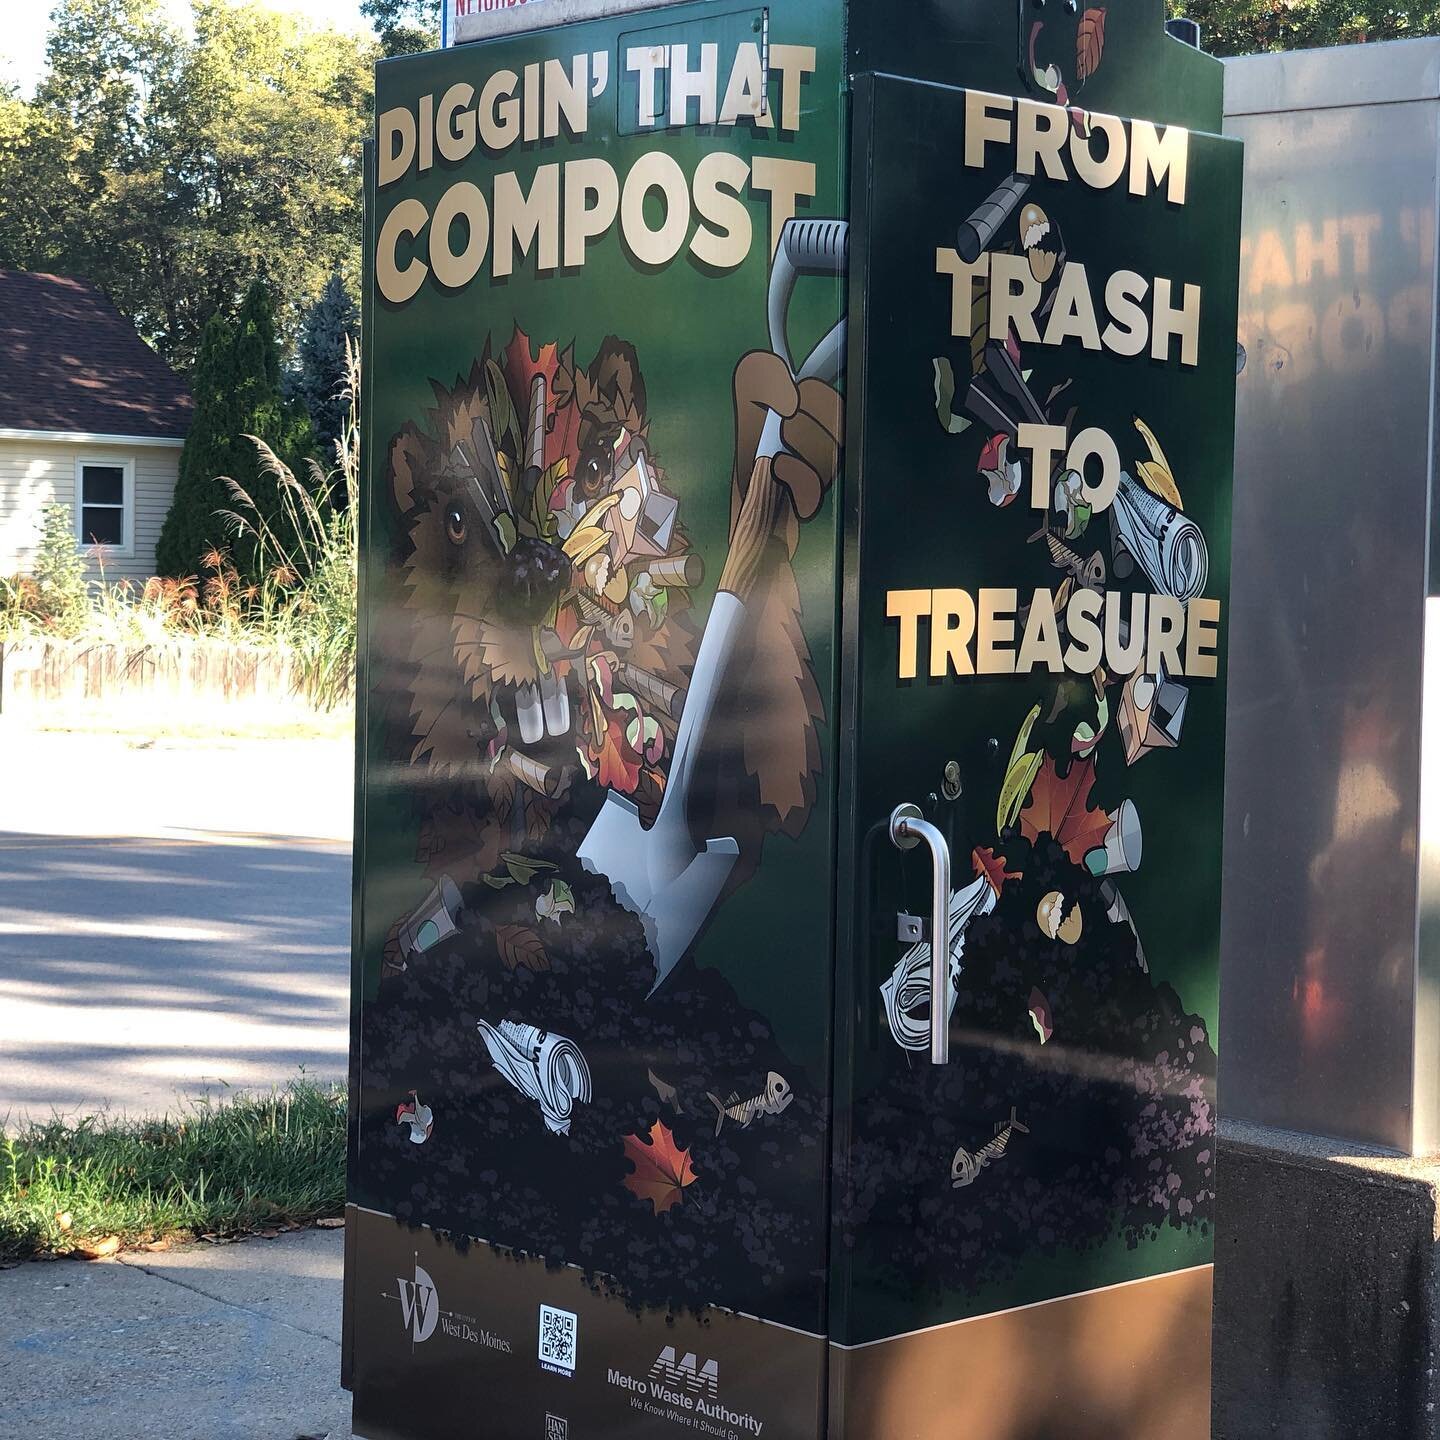 Composting is an easy way to recycle nutrients- lowering the stress on our agricultural system and landfills 🤗

Contrary to popular belief, you don&rsquo;t need worms to compost!  The microbes in the biological waste (e.g. food waste) do all the wor